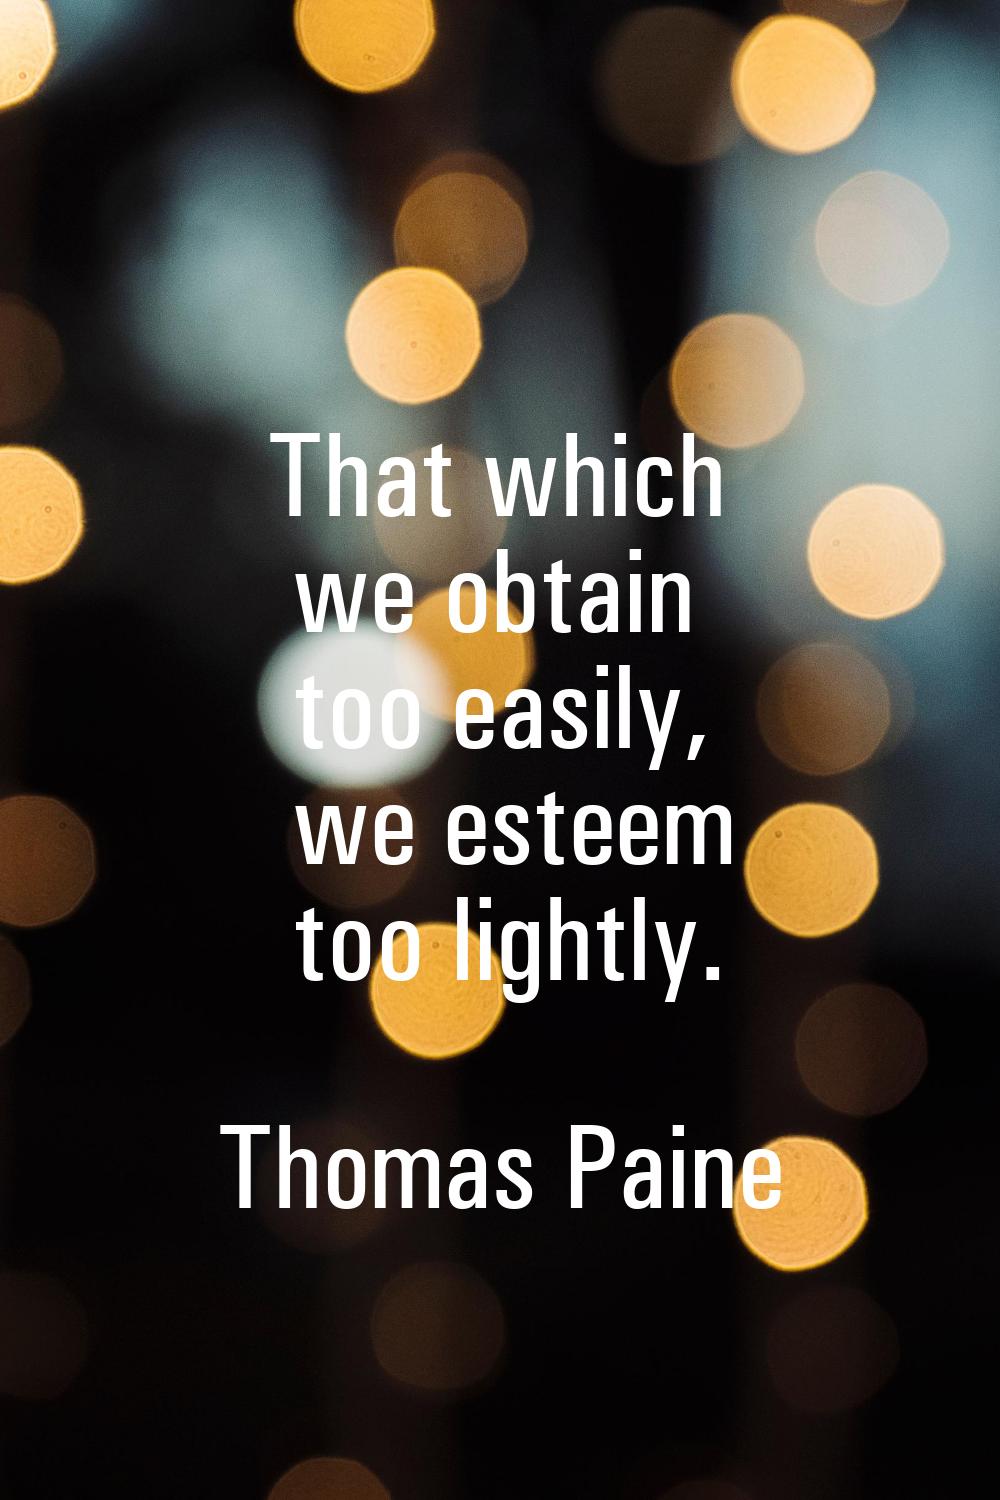 That which we obtain too easily, we esteem too lightly.